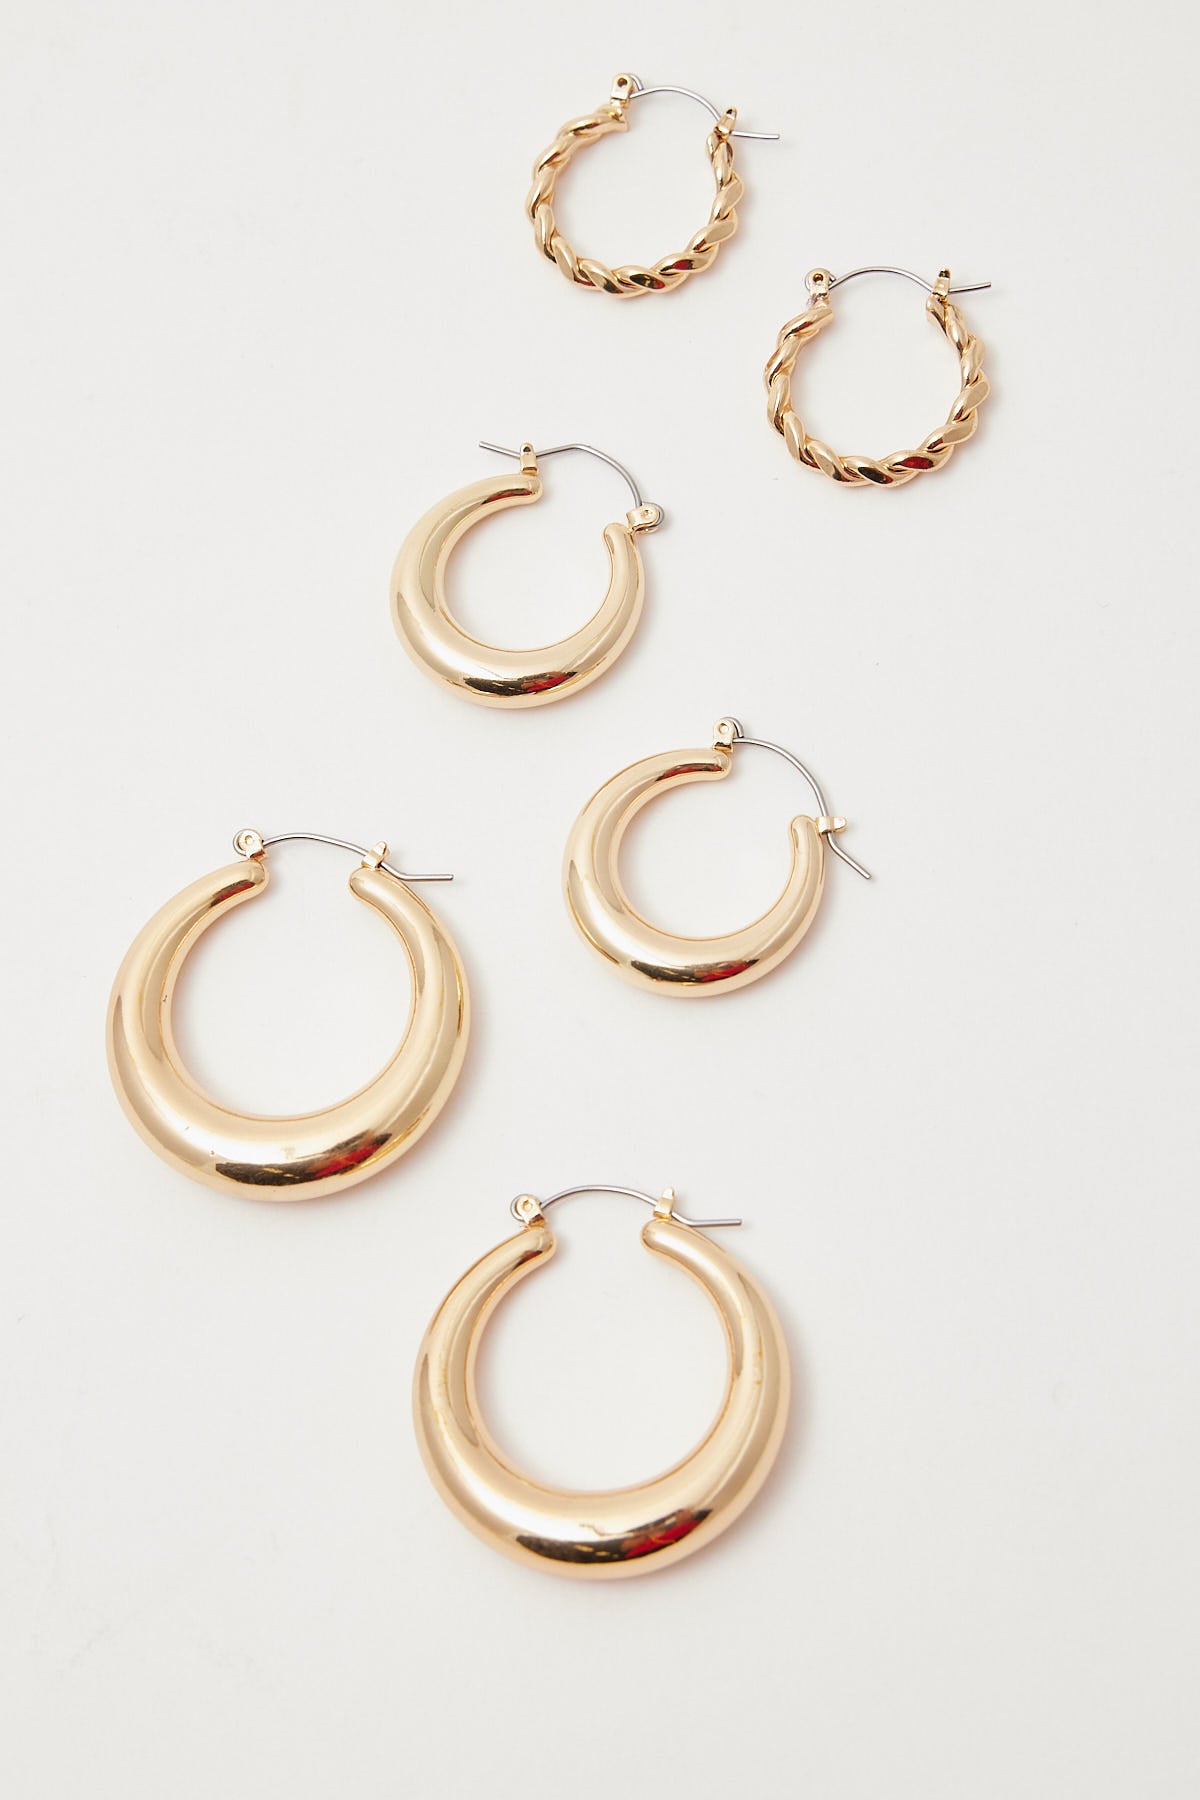 Perfect Stranger Cherished Hoop Earrings 3 Pack Gold Gold